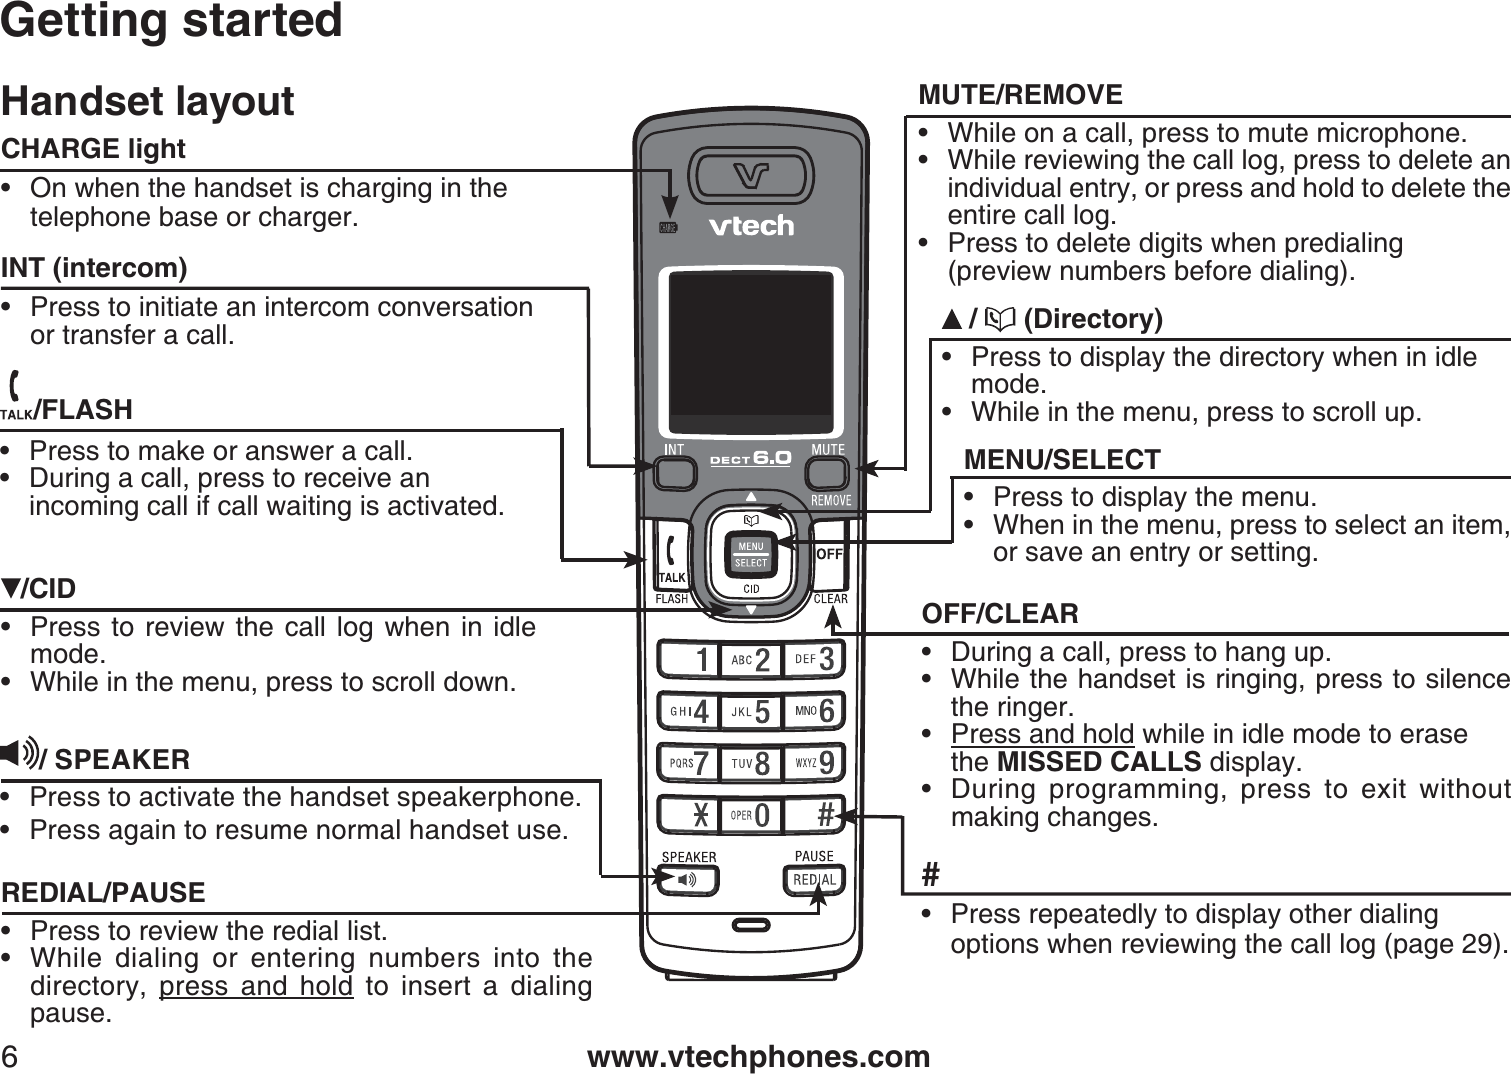 www.vtechphones.com6Handset layoutGetting started/CID• Press to review the call log when in idlemode.While in the menu, press to scroll down.•/FLASH• Press to make or answer a call.• During a call, press to receive an incoming call if call waiting is activated./  (Directory)• Press to display the directory when in idlemode.While in the menu, press to scroll up.•MENU/SELECT• Press to display the menu.• When in the menu, press to select an item,or save an entry or setting.OFF/CLEAR• During a call, press to hang up.• While the handset is ringing, press to silencethe ringer.•Press and hold while in idle mode to erase the MISSED CALLS display.• During programming, press to exit without making changes.REDIAL/PAUSE• Press to review the redial list.• While dialing or entering numbers into the directory, press and hold to insert a dialing pause.CHARGE light• On when the handset is charging in the telephone base or charger.#• Press repeatedly to display other dialingoptions when reviewing the call log (page 29).INT (intercom)• Press to initiate an intercom conversationor transfer a call./ SPEAKERPress to activate the handset speakerphone.Press again to resume normal handset use.••MUTE/REMOVE• While on a call, press to mute microphone.• While reviewing the call log, press to delete an individual entry, or press and hold to delete the entire call log.•Press to delete digits when predialing(preview numbers before dialing).